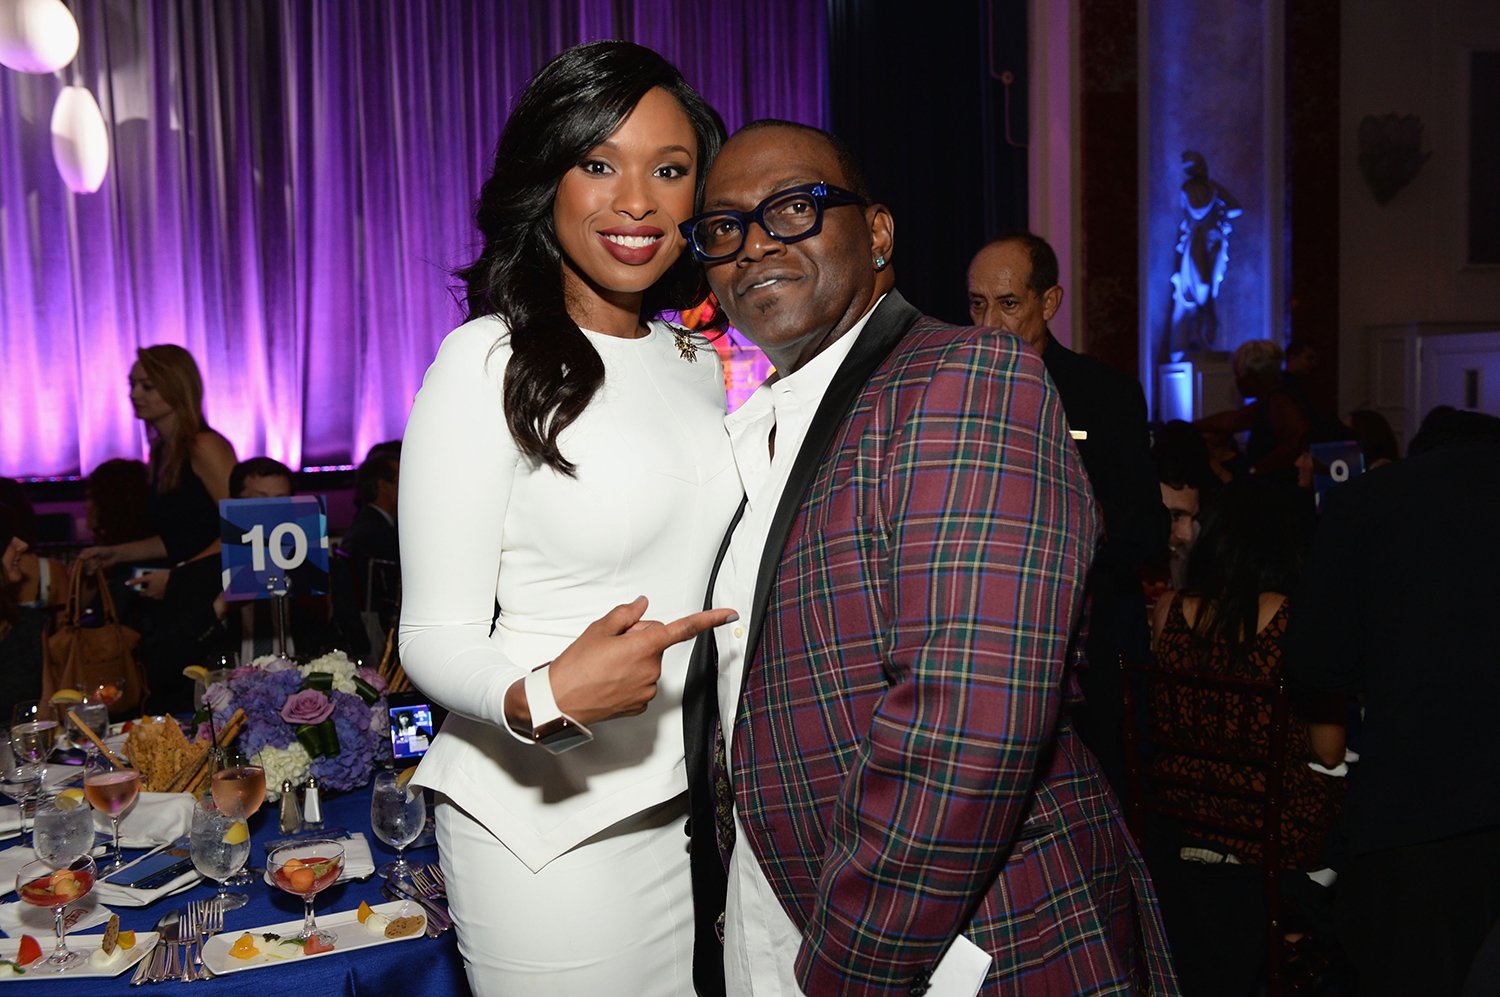 Former American Idol stars Jennifer Hudson and Randy Jackson attend ariety's 5th Annual Power of Women event in 2013.